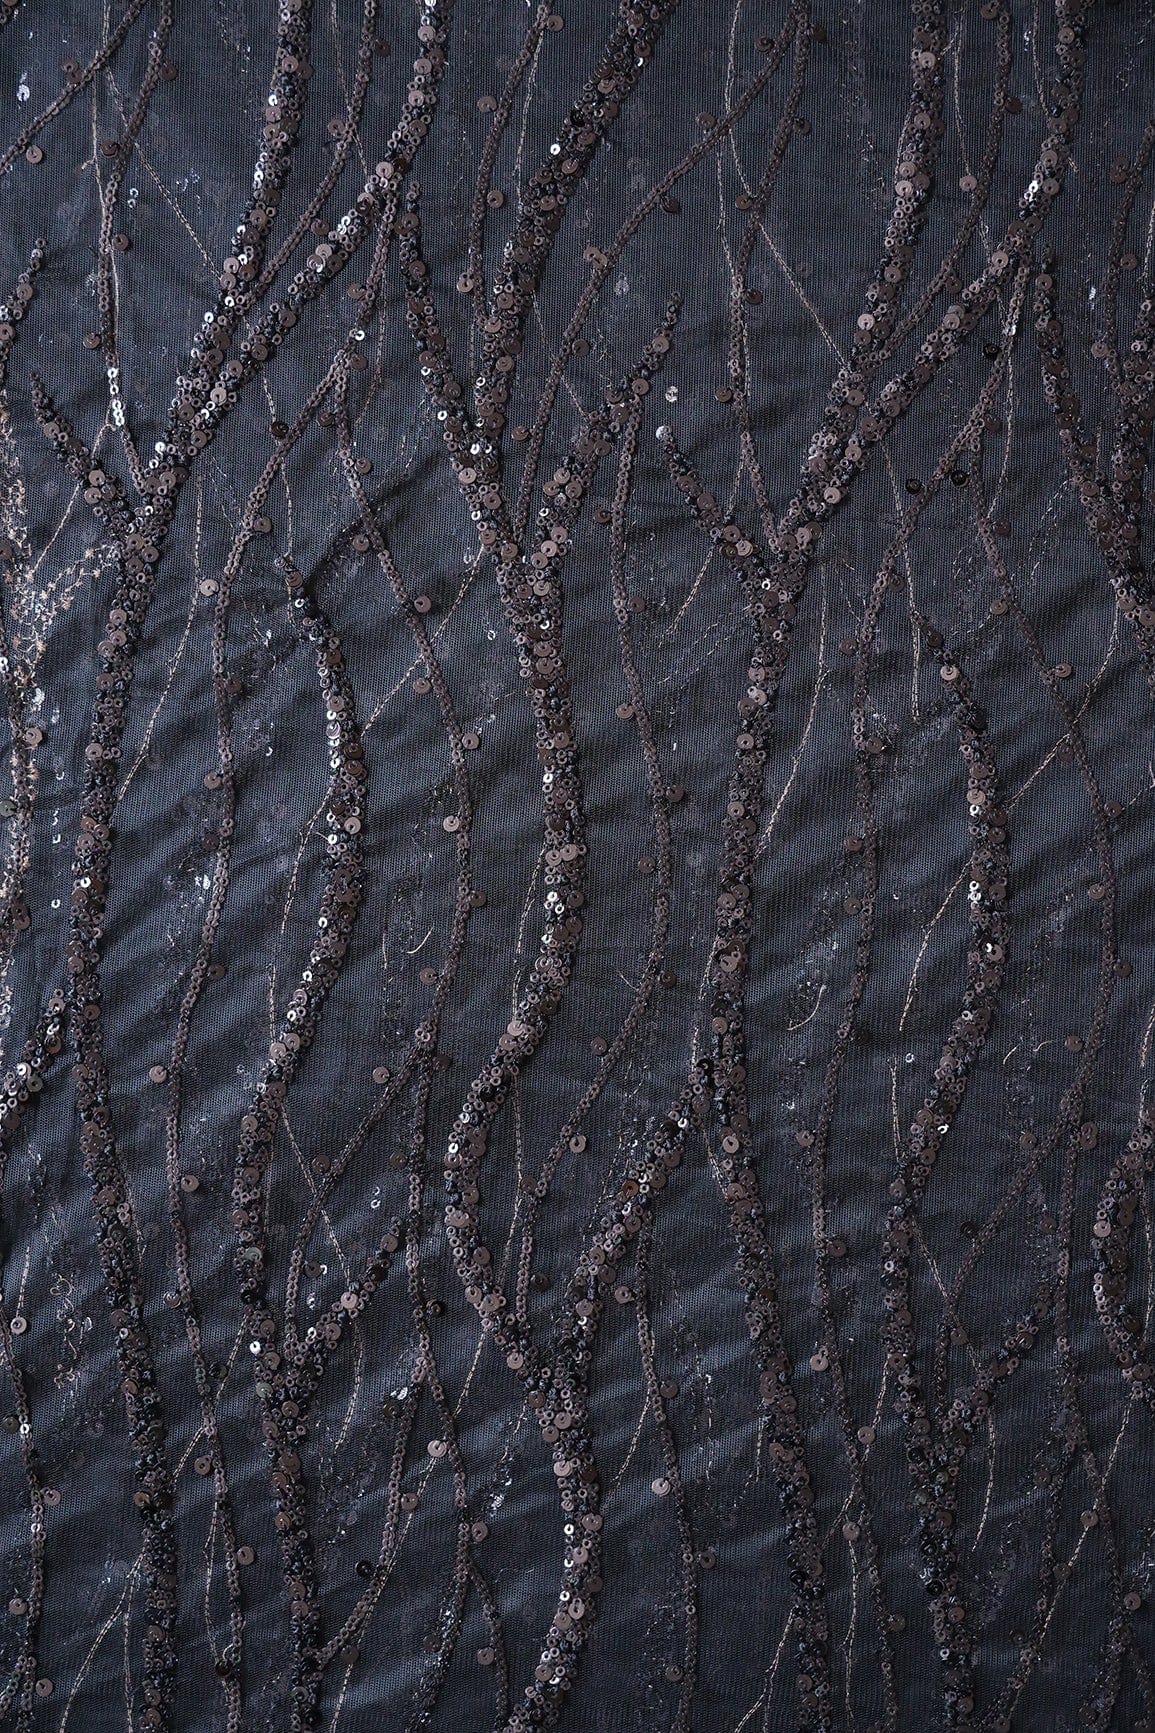 doeraa Embroidery Fabrics Beautiful Sequins With Black Thread Wavy Embroidery Work On Black Soft Net Fabric